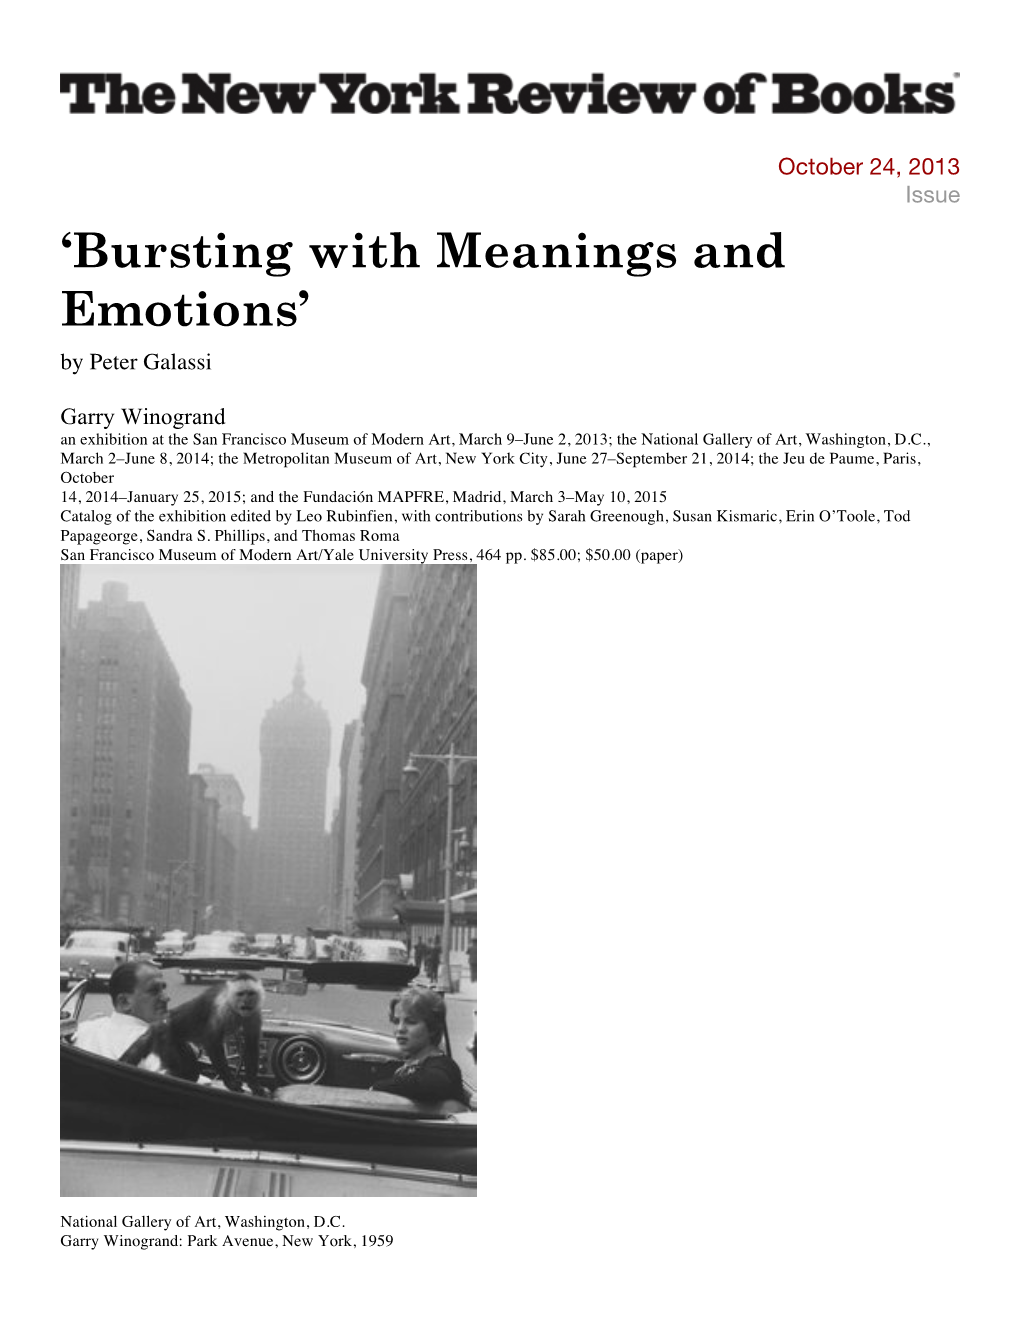 'Bursting with Meanings and Emotions'